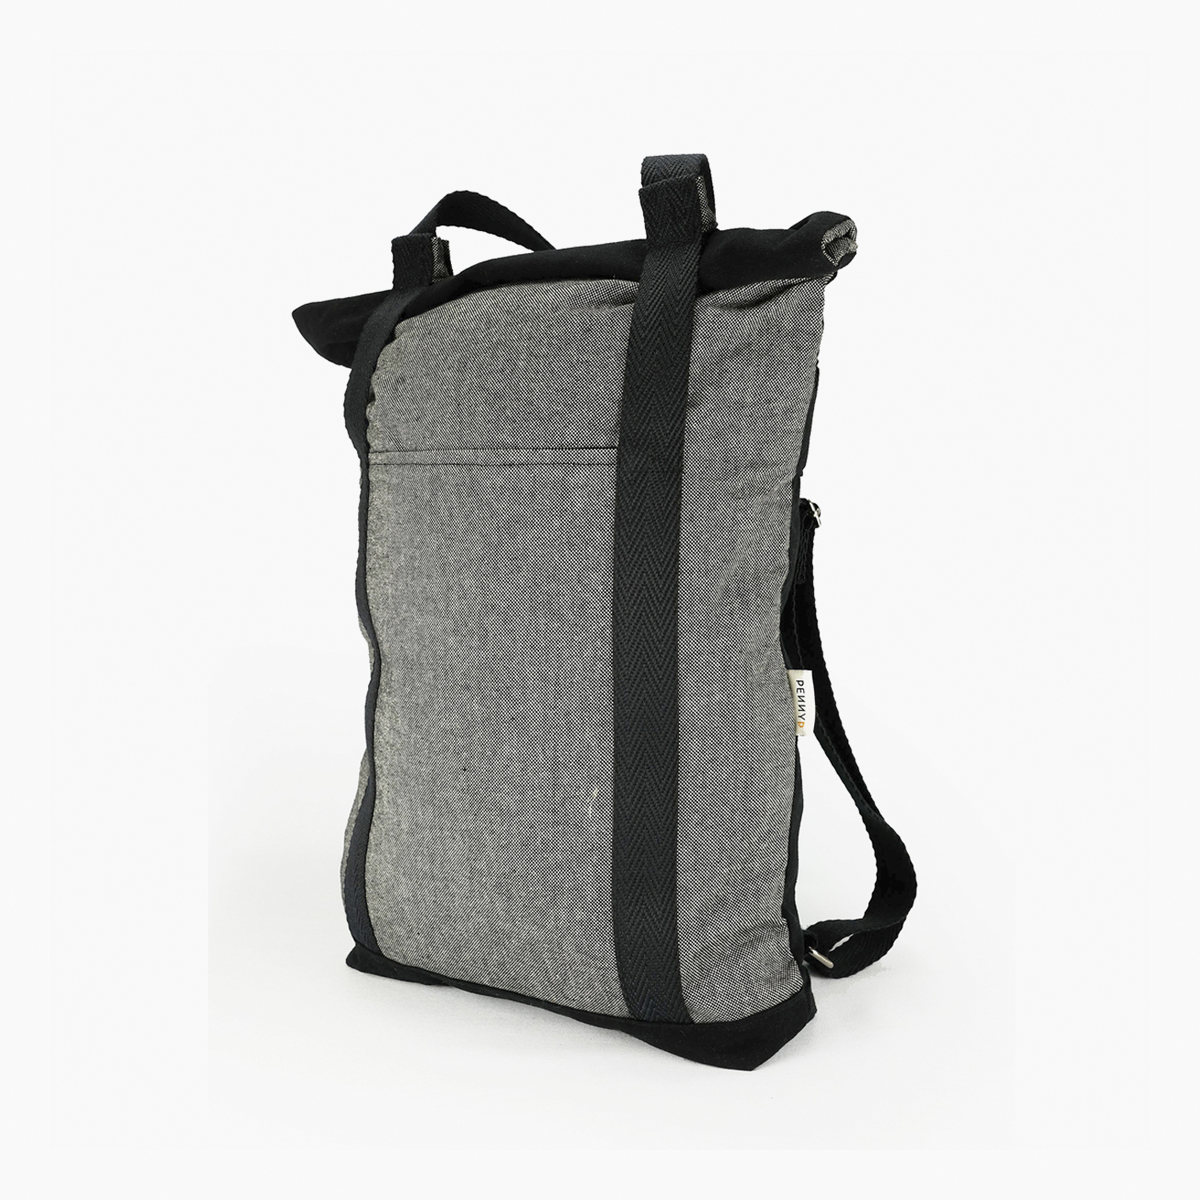 https://www.pennyp.es/wp-content/uploads/2019/10/Convertible-tote-backpack-grey-black-straps-01.jpg